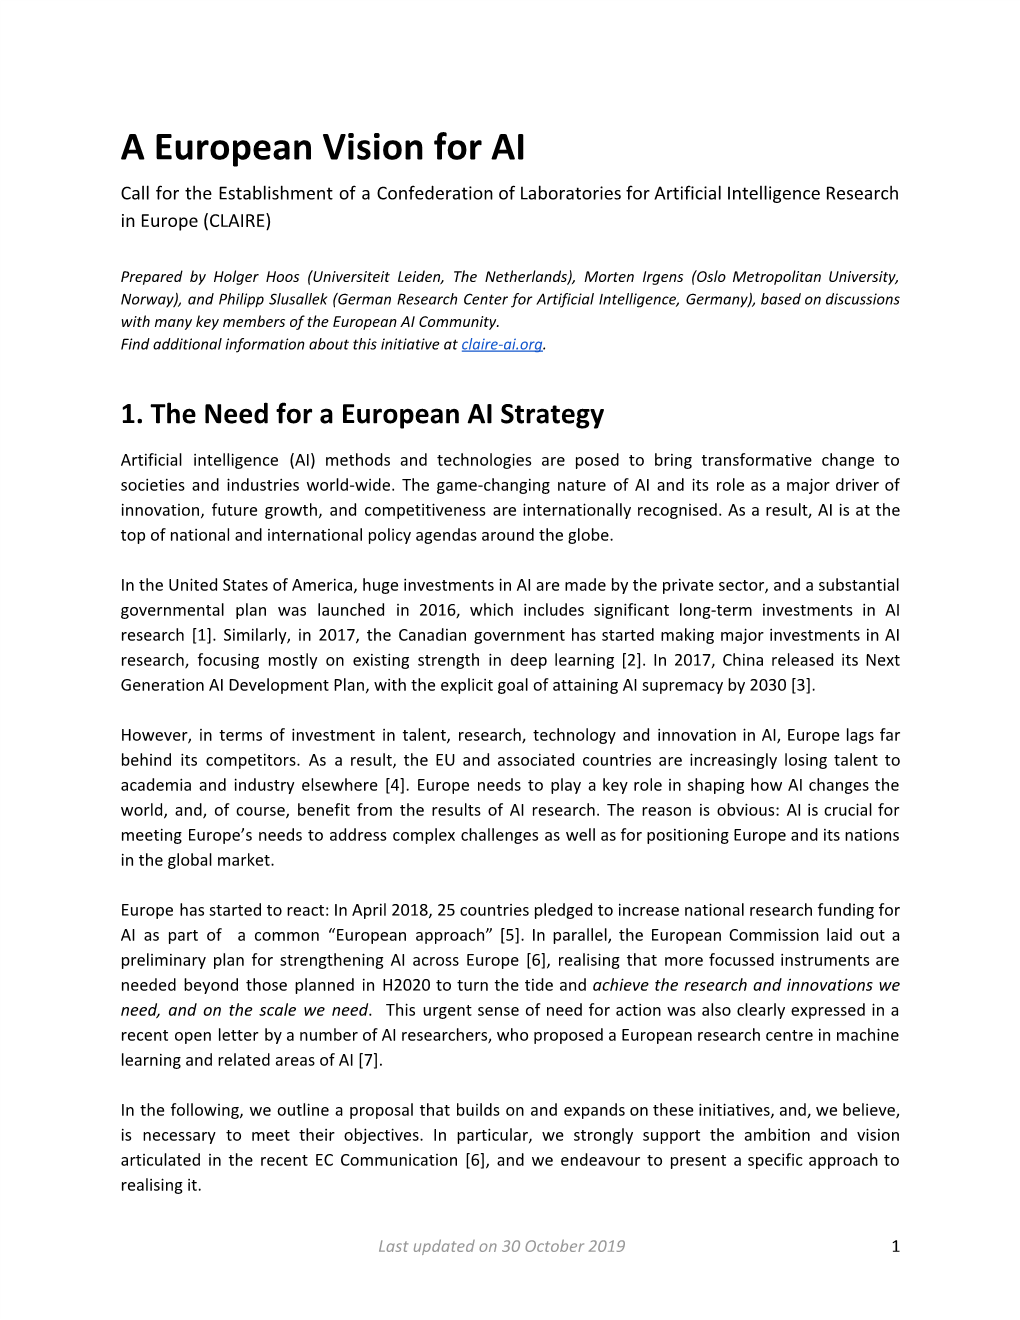 A European Vision for AI Call for the Establishment of a Confederation of Laboratories for Artificial Intelligence Research in Europe (CLAIRE)